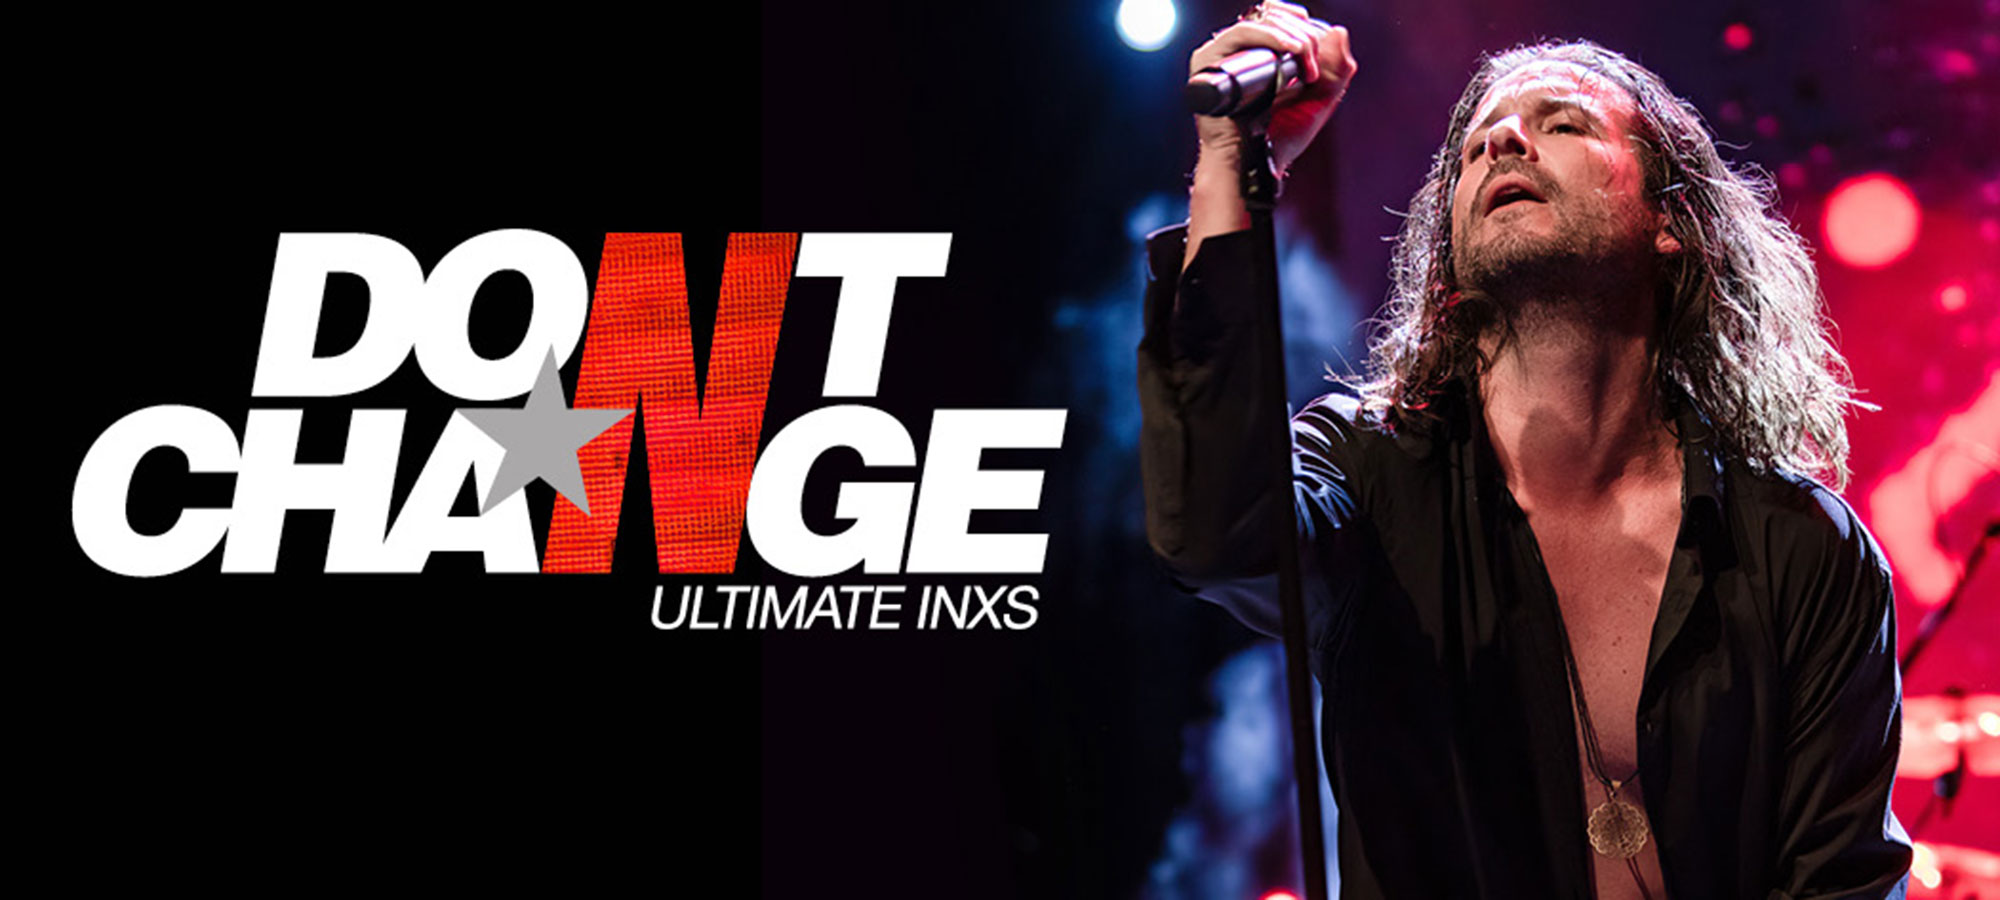 Don’t Change Ultimate INXS